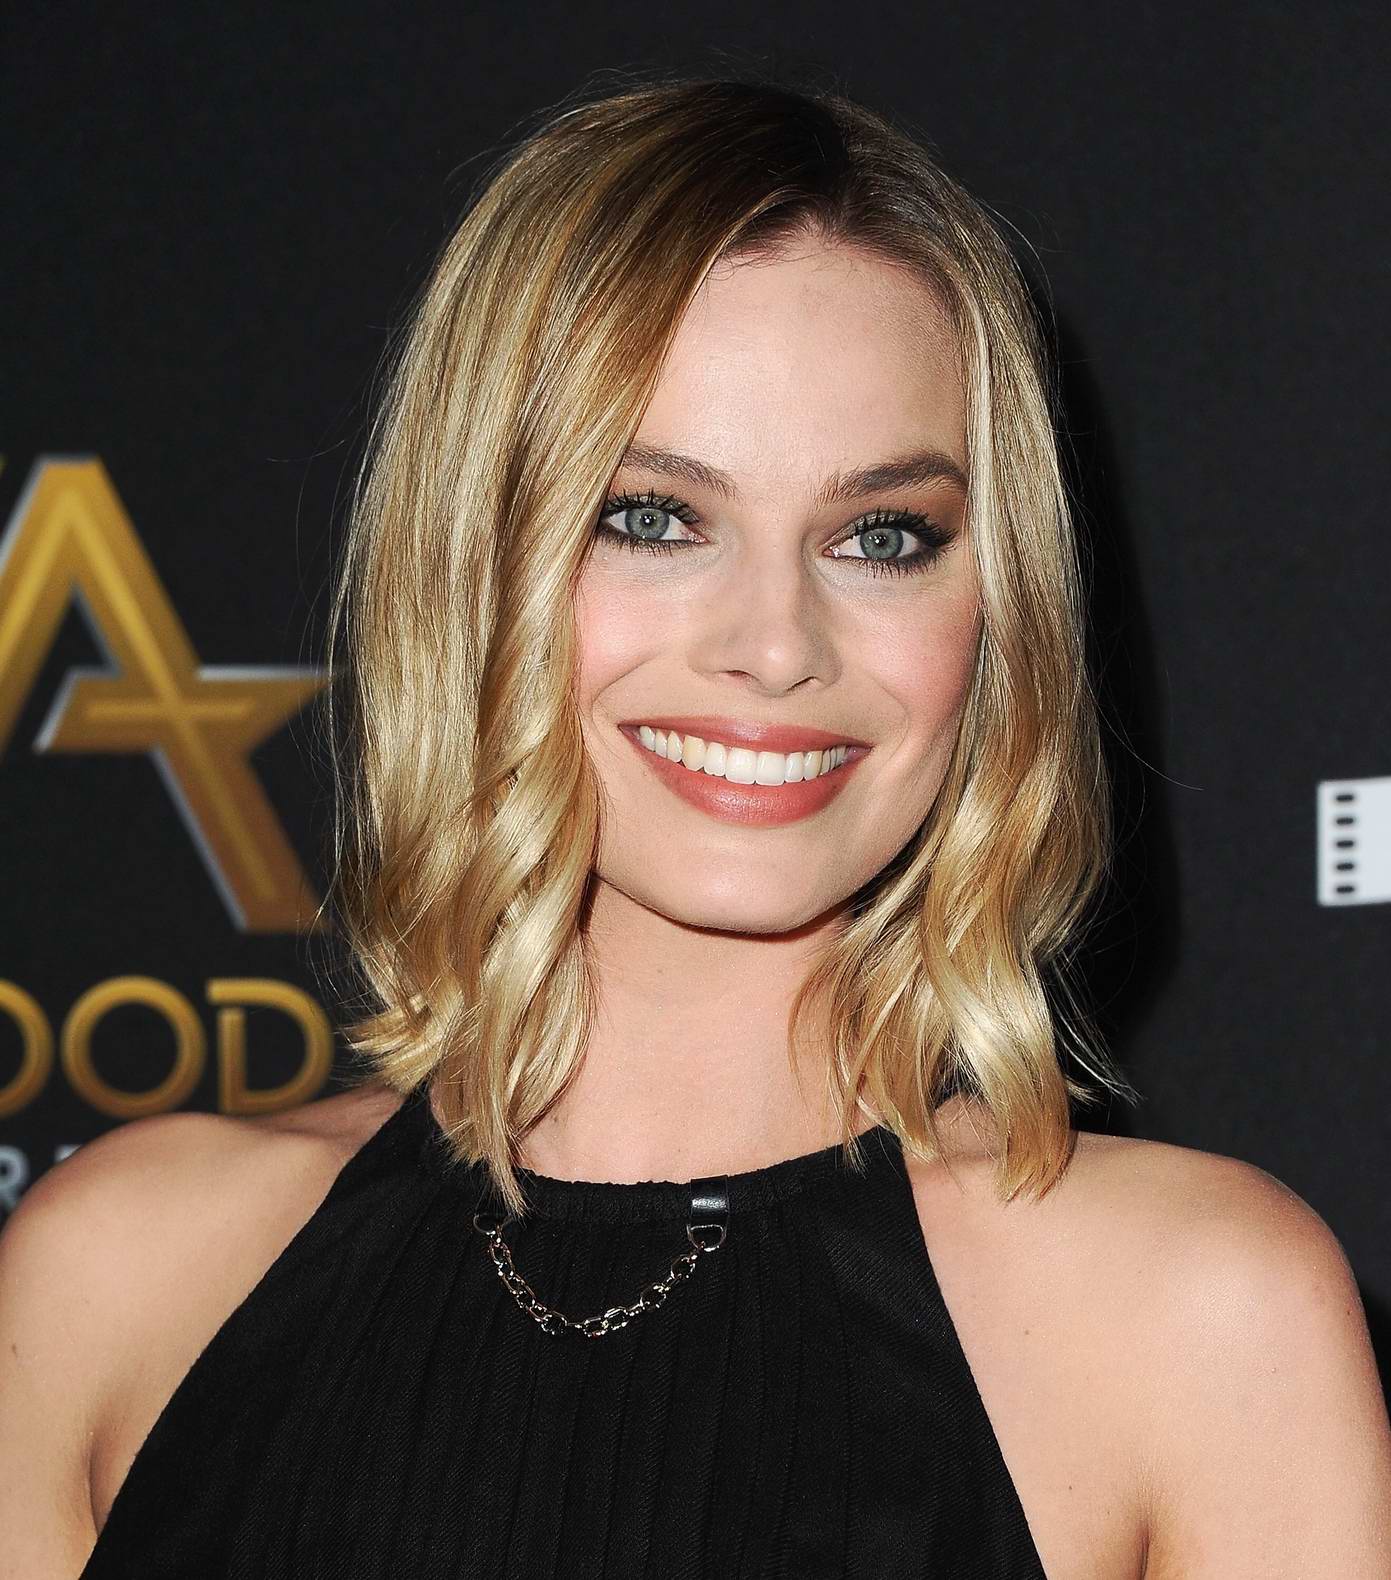 margot robbie attends the hollywood film awards in los angeles-051117_8